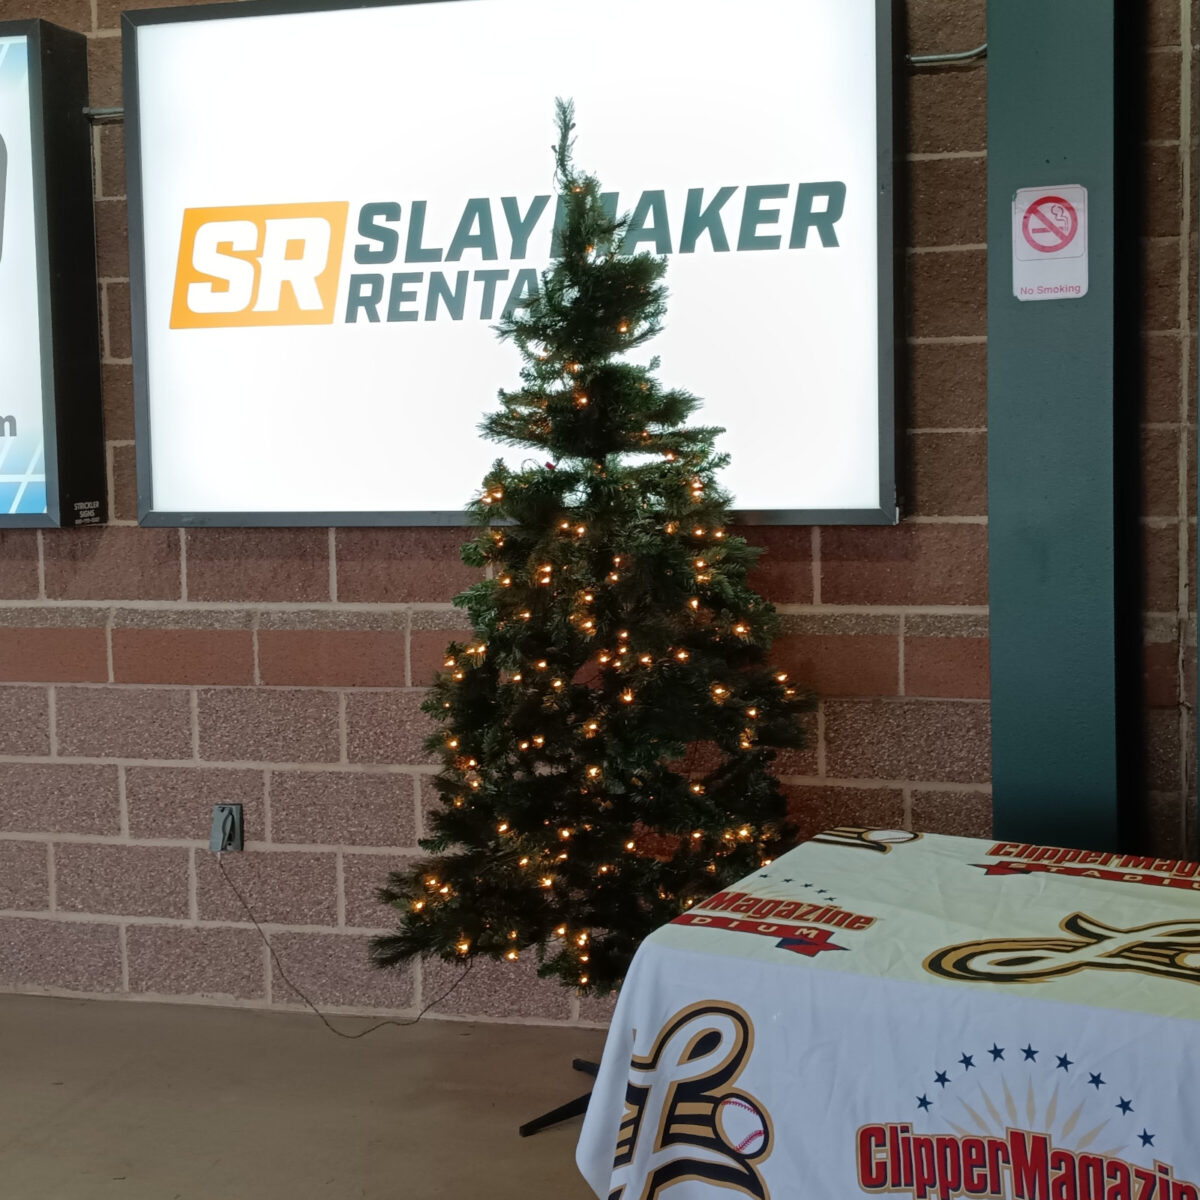 A lighted Christmas tree erected on the stadium concourse